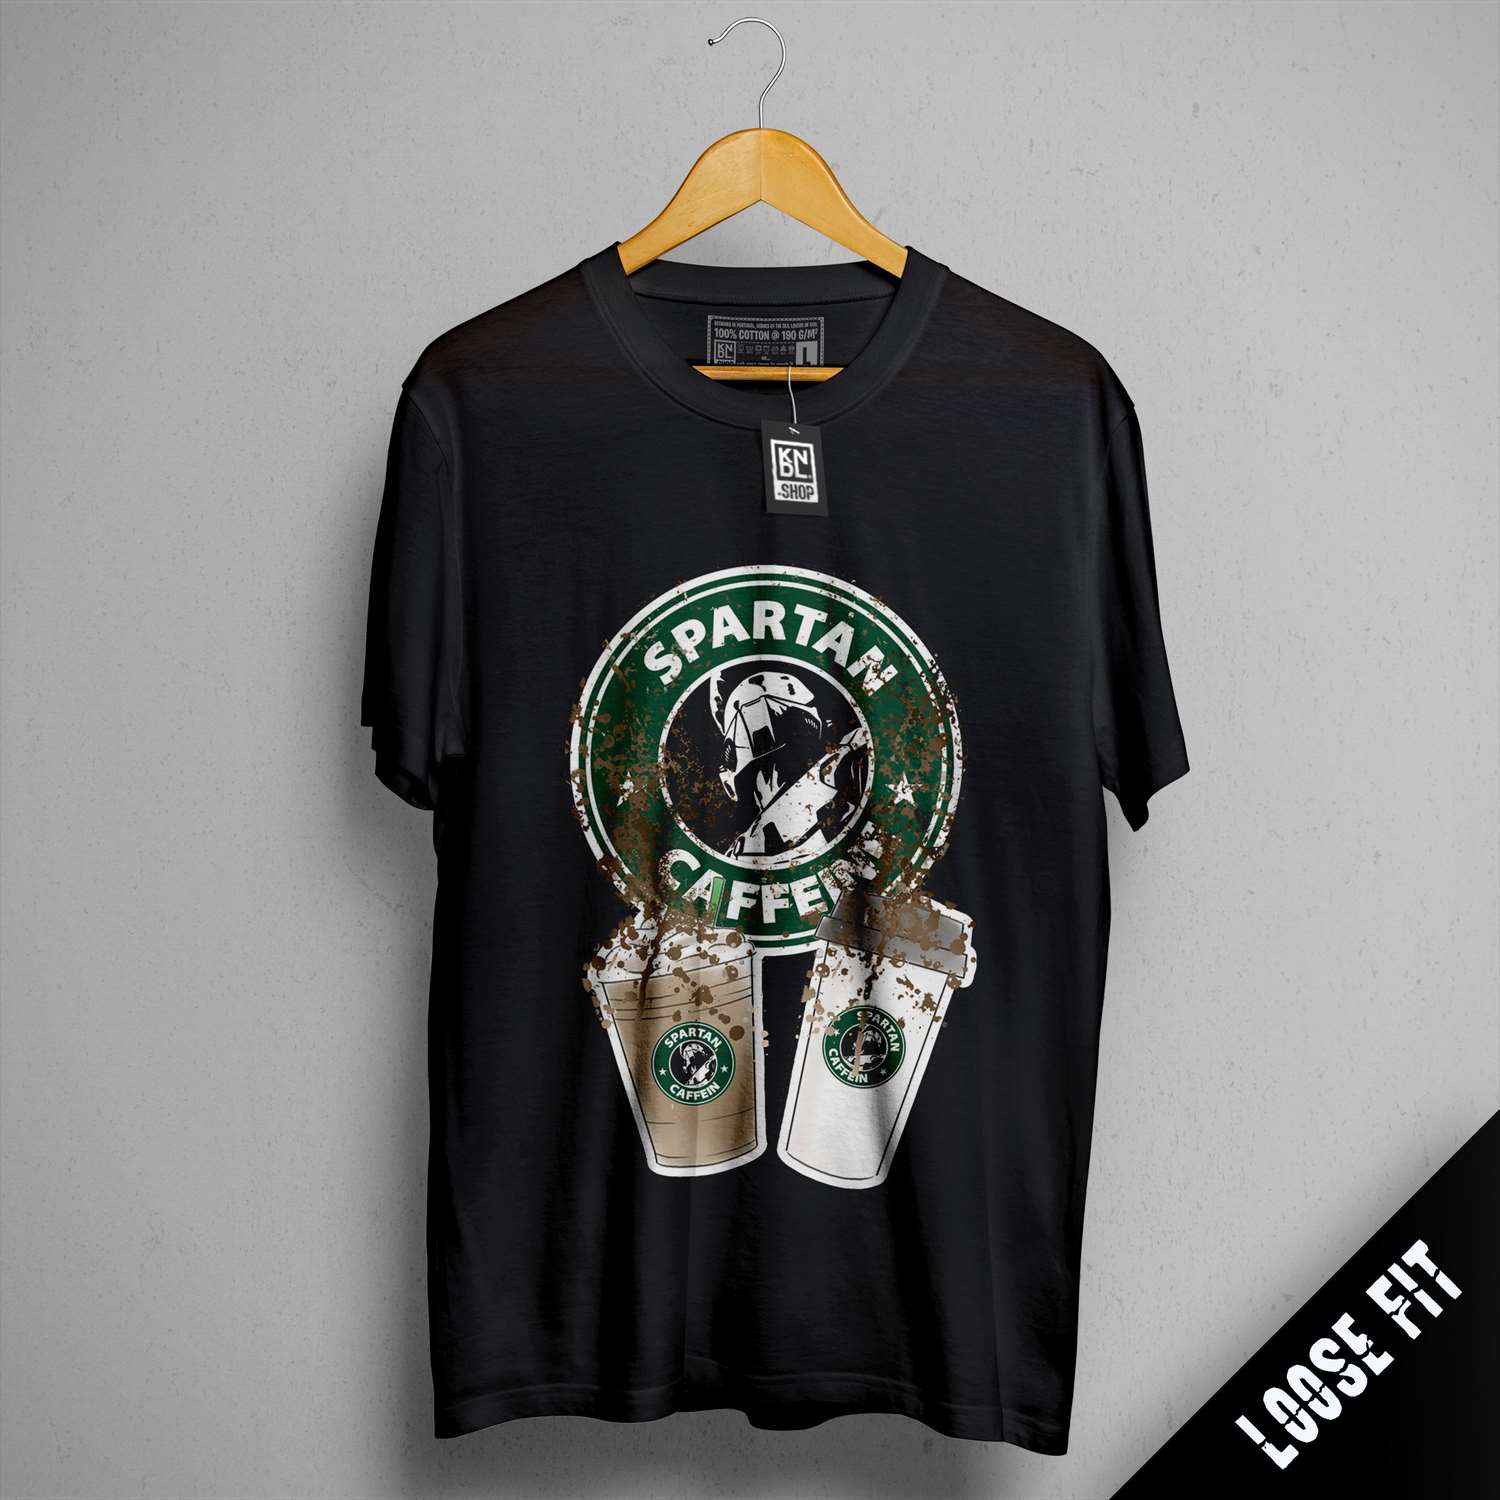 a black shirt with a starbucks logo on it